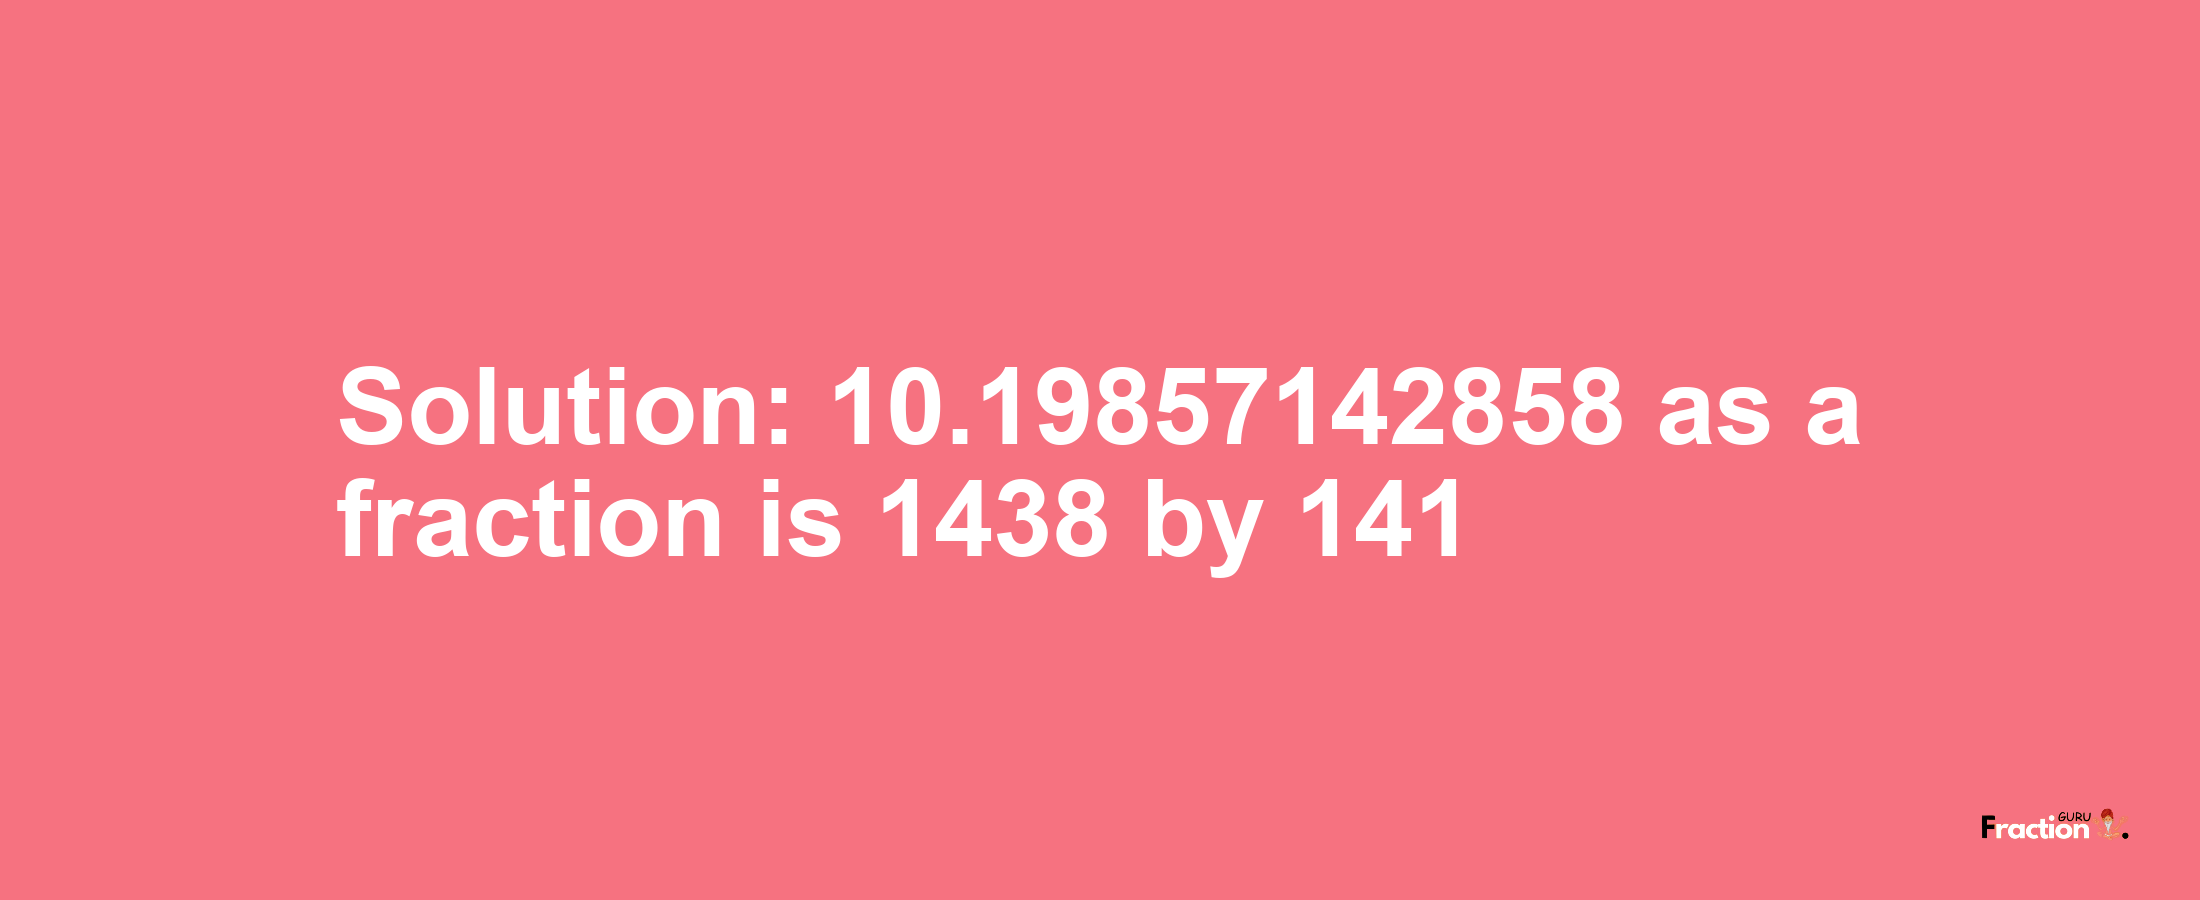 Solution:10.19857142858 as a fraction is 1438/141